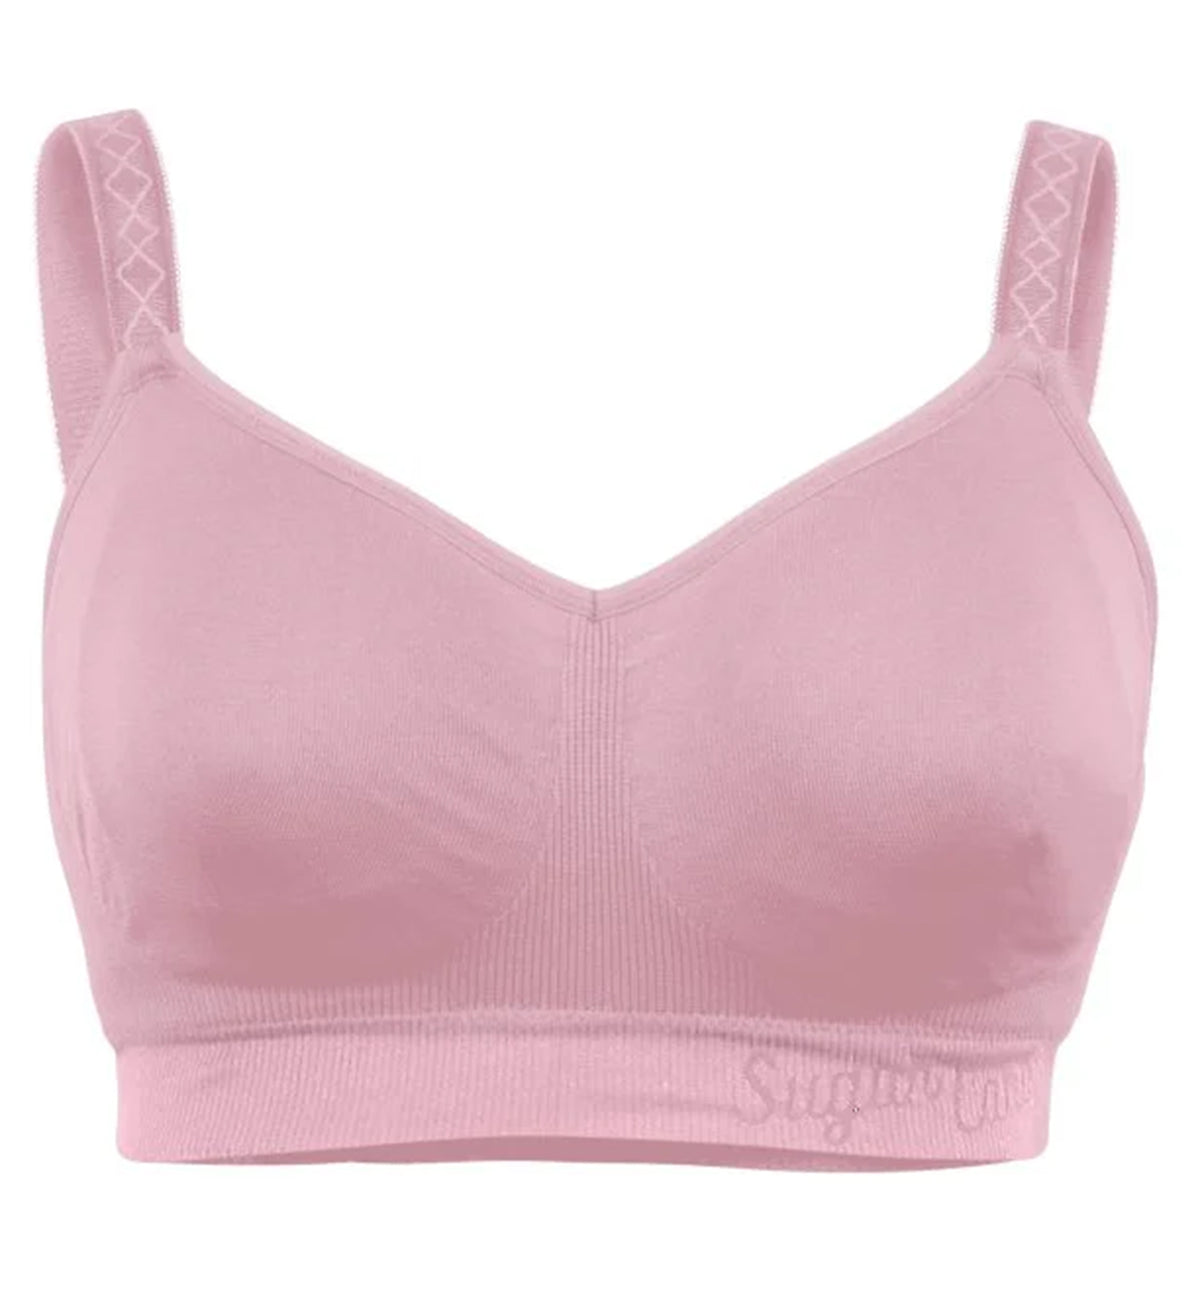 Sugar Candy by Cake Seamless Basic Everyday Softcup Bra (28-8005),XS,Pink - Pink,XS